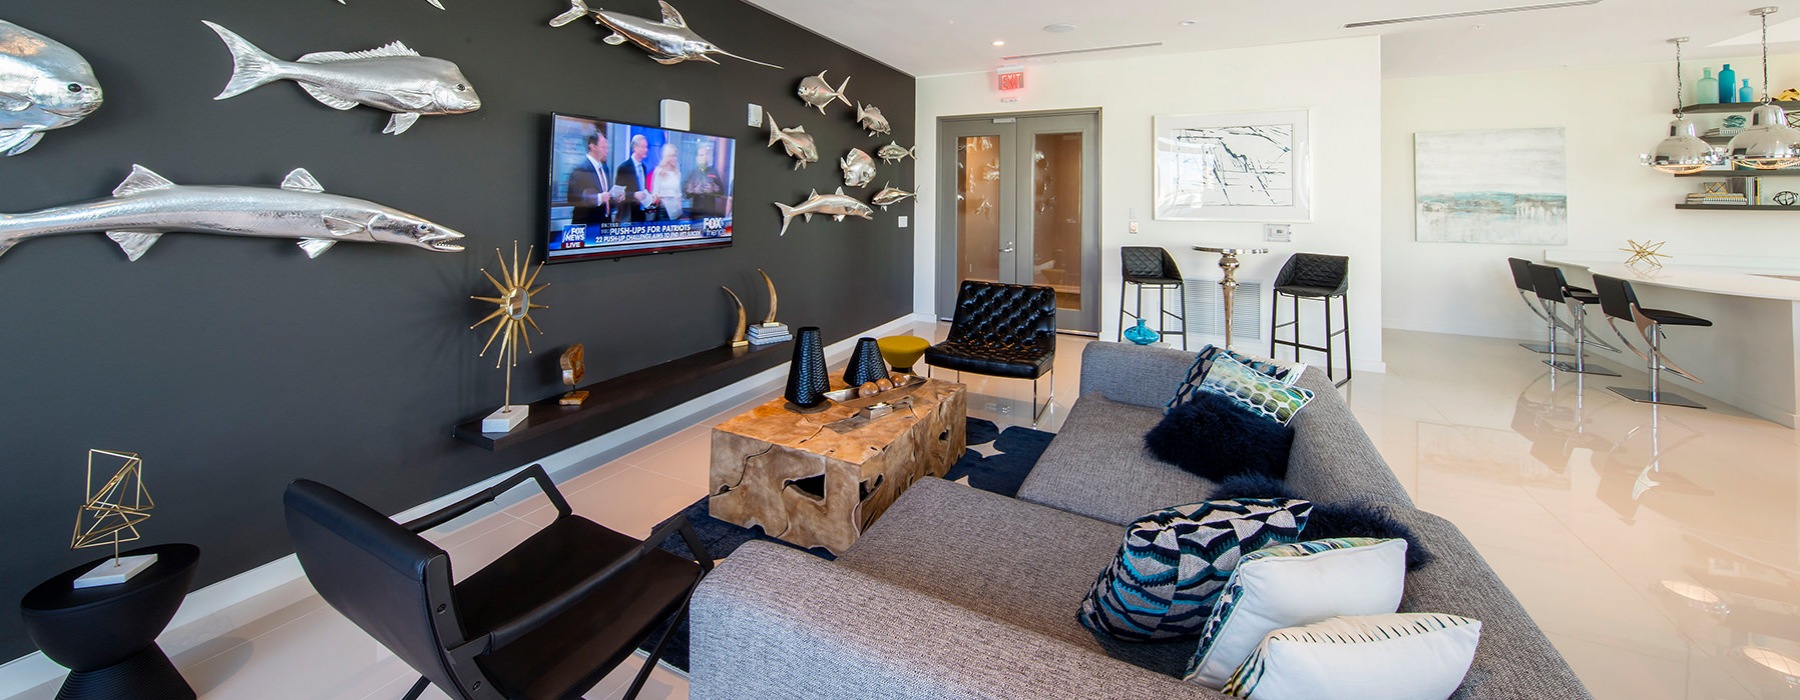 Resident Lounge with comfortable seating and gaming area